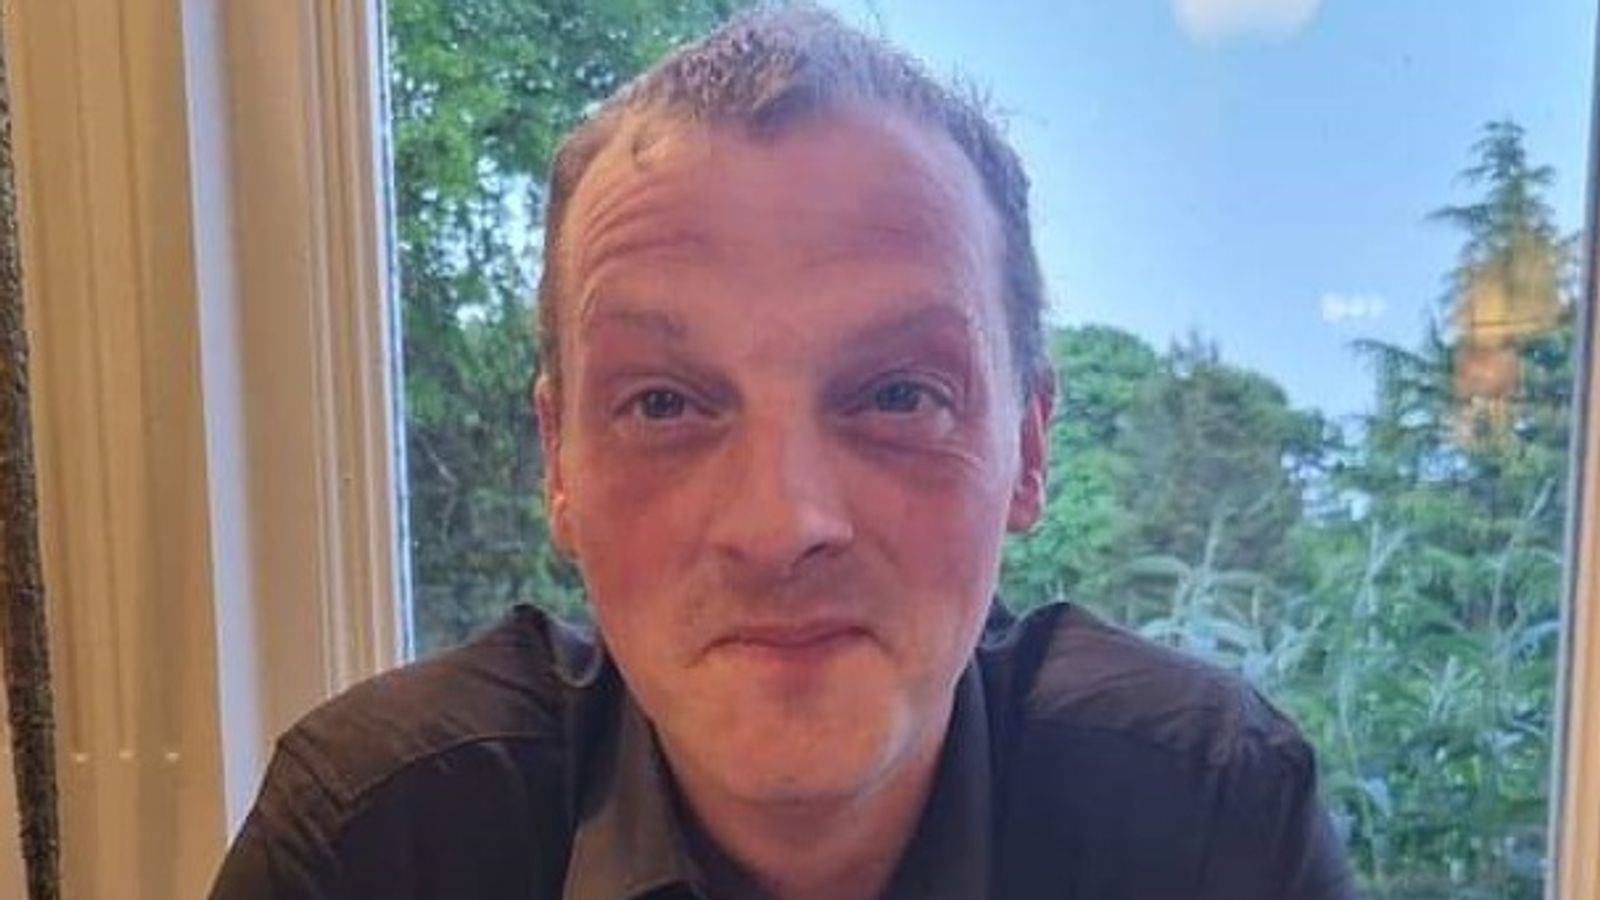 M53 school bus crash: Driver who died is named as Stephen Shrimpton as family says he 'suffered medical issues' at the wheel